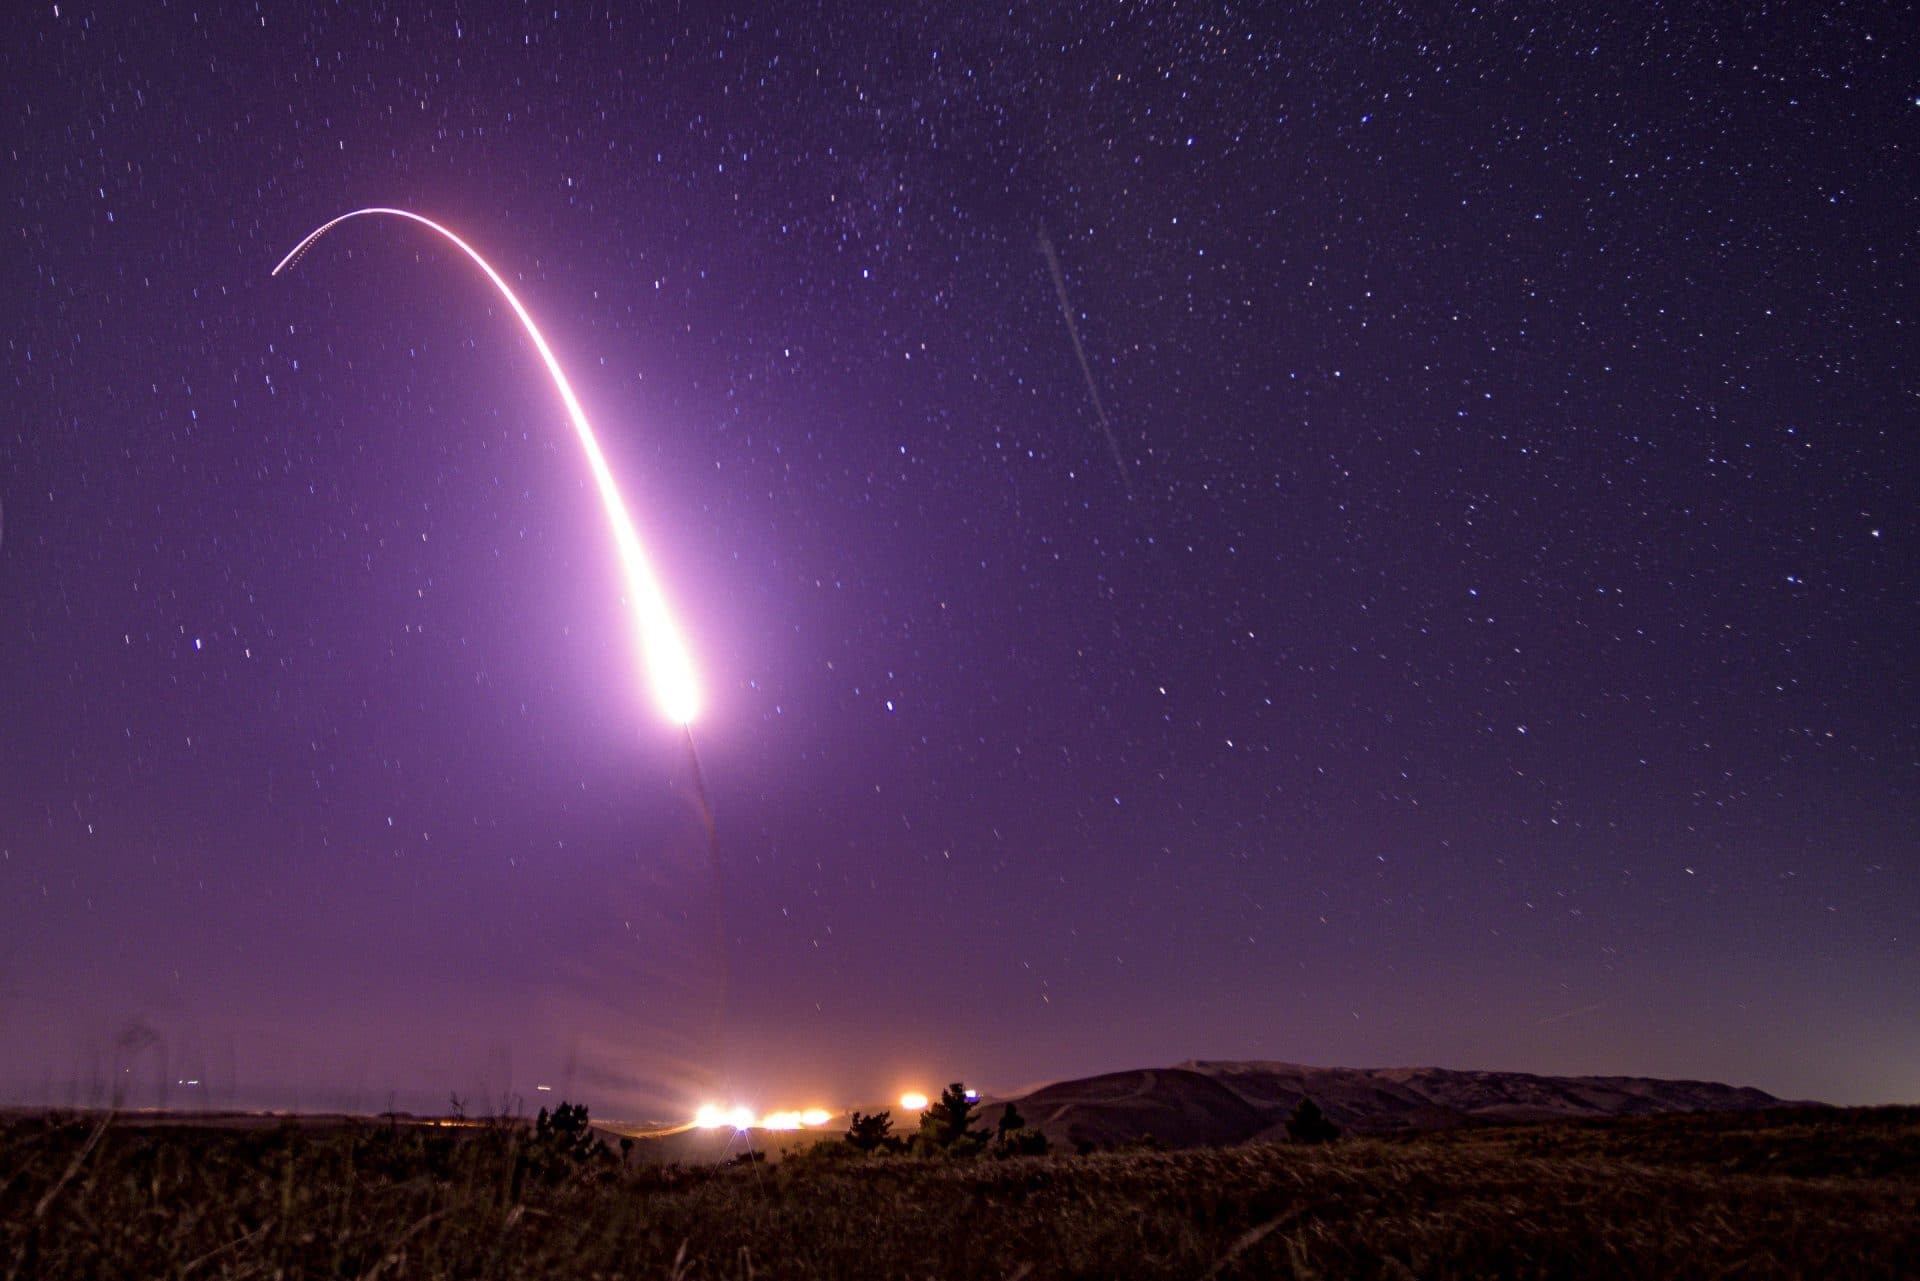         An unarmed Minuteman III intercontinental ballistic missile launches during an operational test at 1:13 a.m. Pacific Time Oct. 2, 2019, at Van